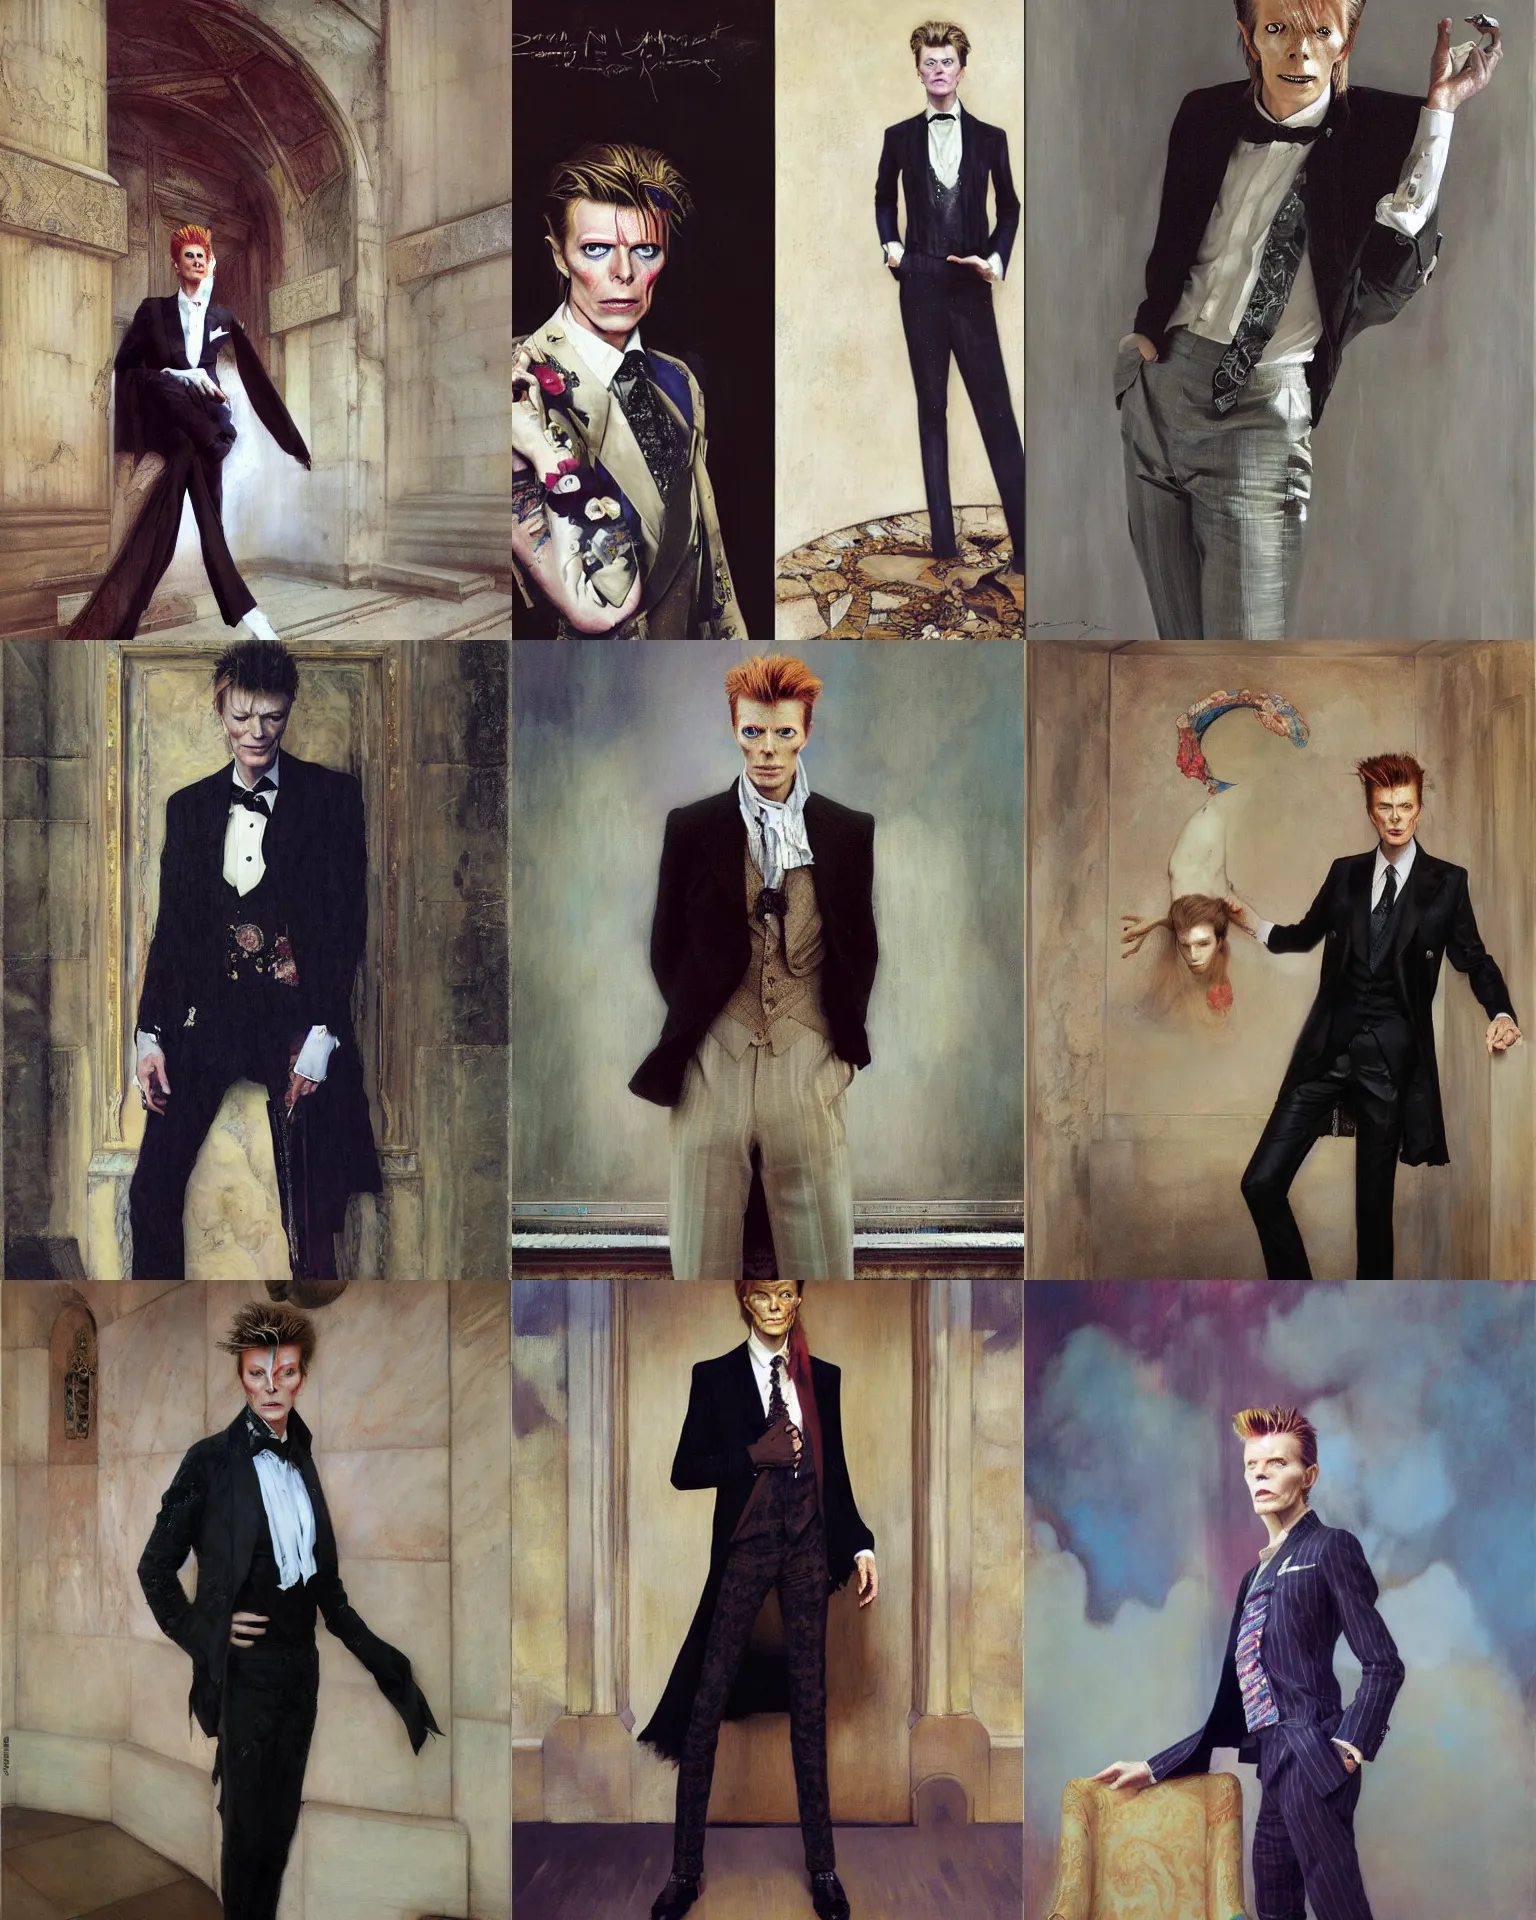 Prompt: A portrait of David Bowie in a suit by loish, Lawrence Alma-tadema, Thomas Moran, Mandy Jurgens, fashion photography